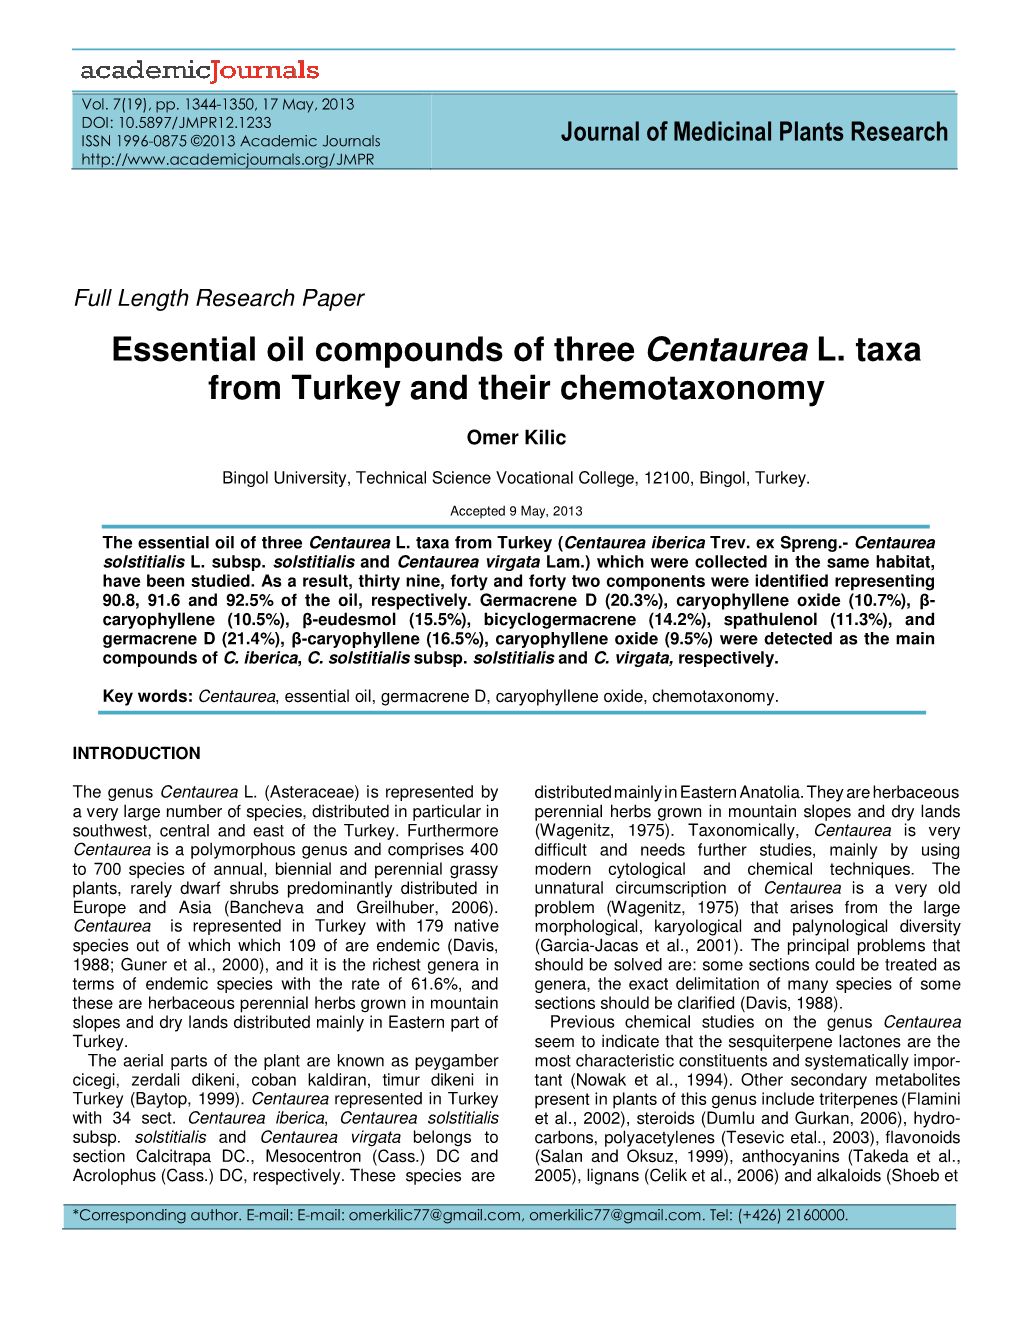 Essential Oil Compounds of Three Centaurea L. Taxa from Turkey and Their Chemotaxonomy